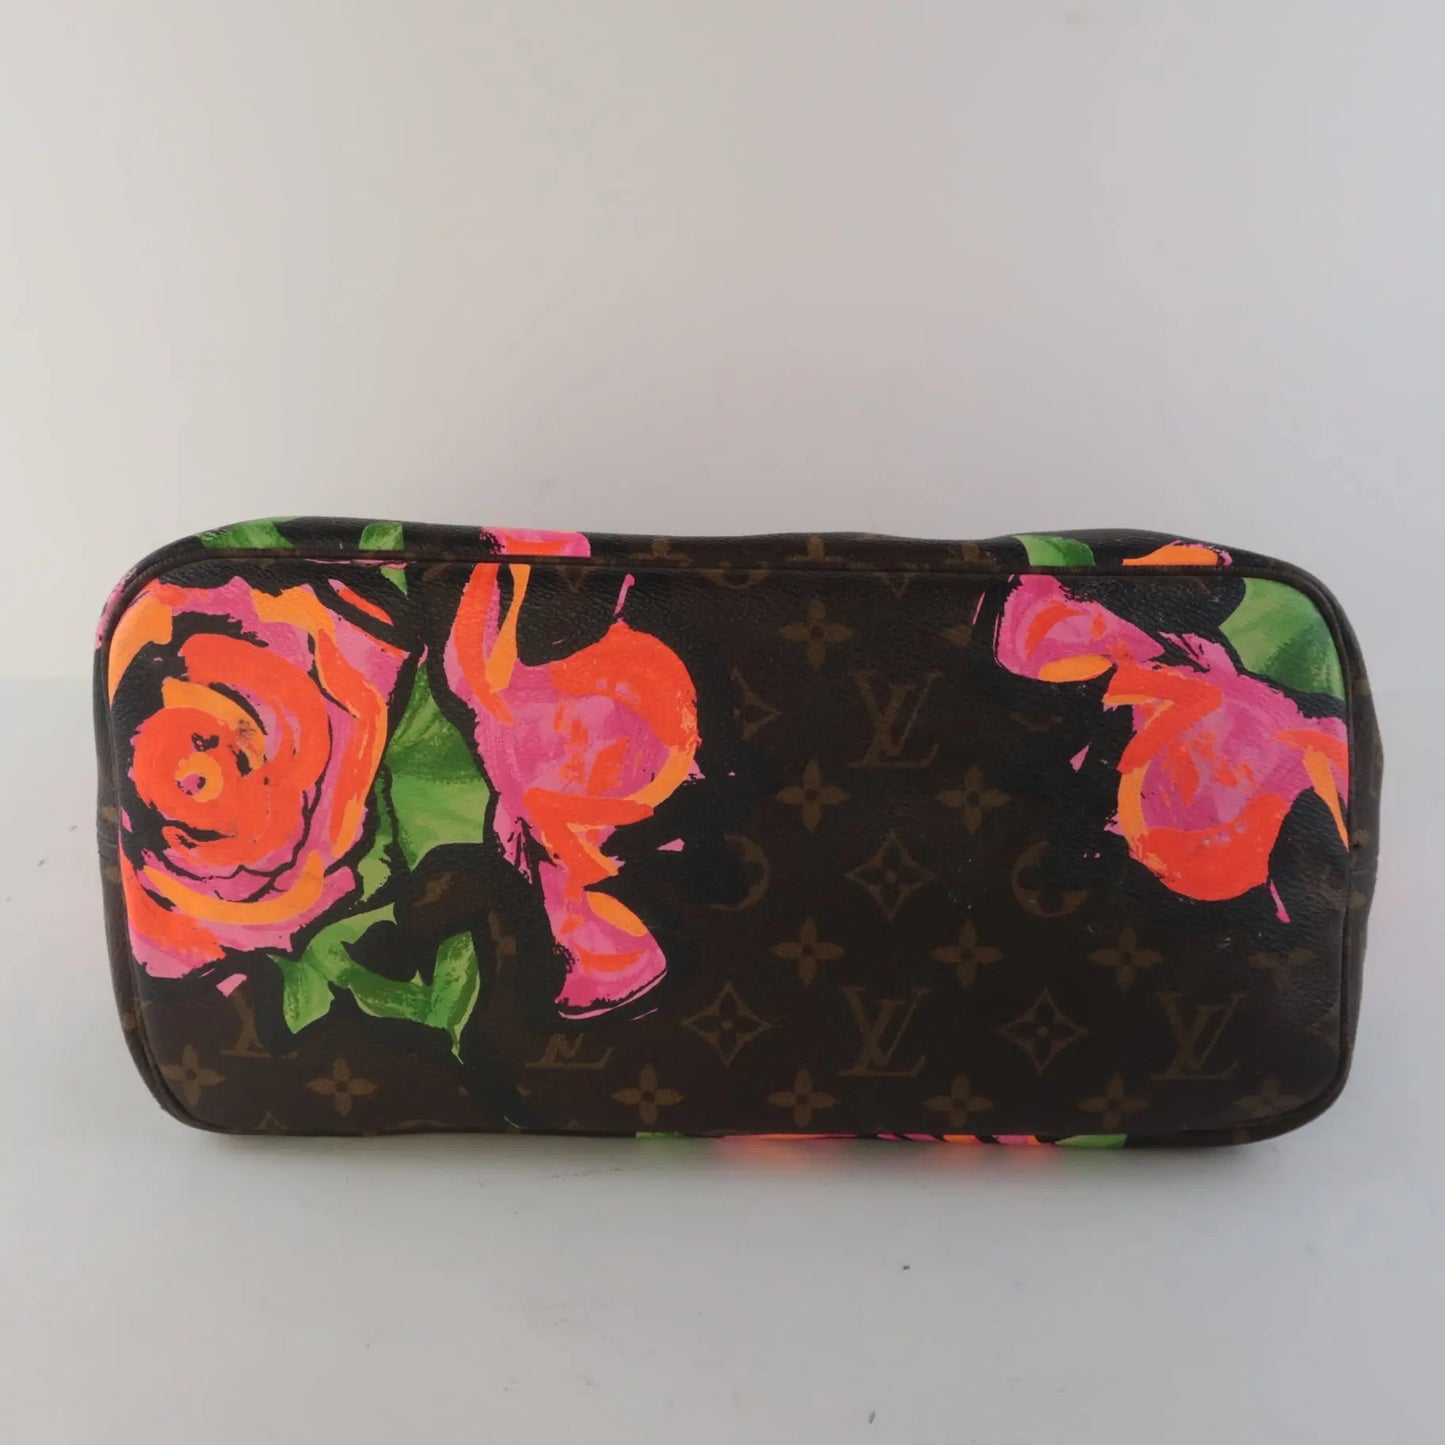 Limited Edition Louis Vuitton x Stephen Sprouse Roses Wallet in